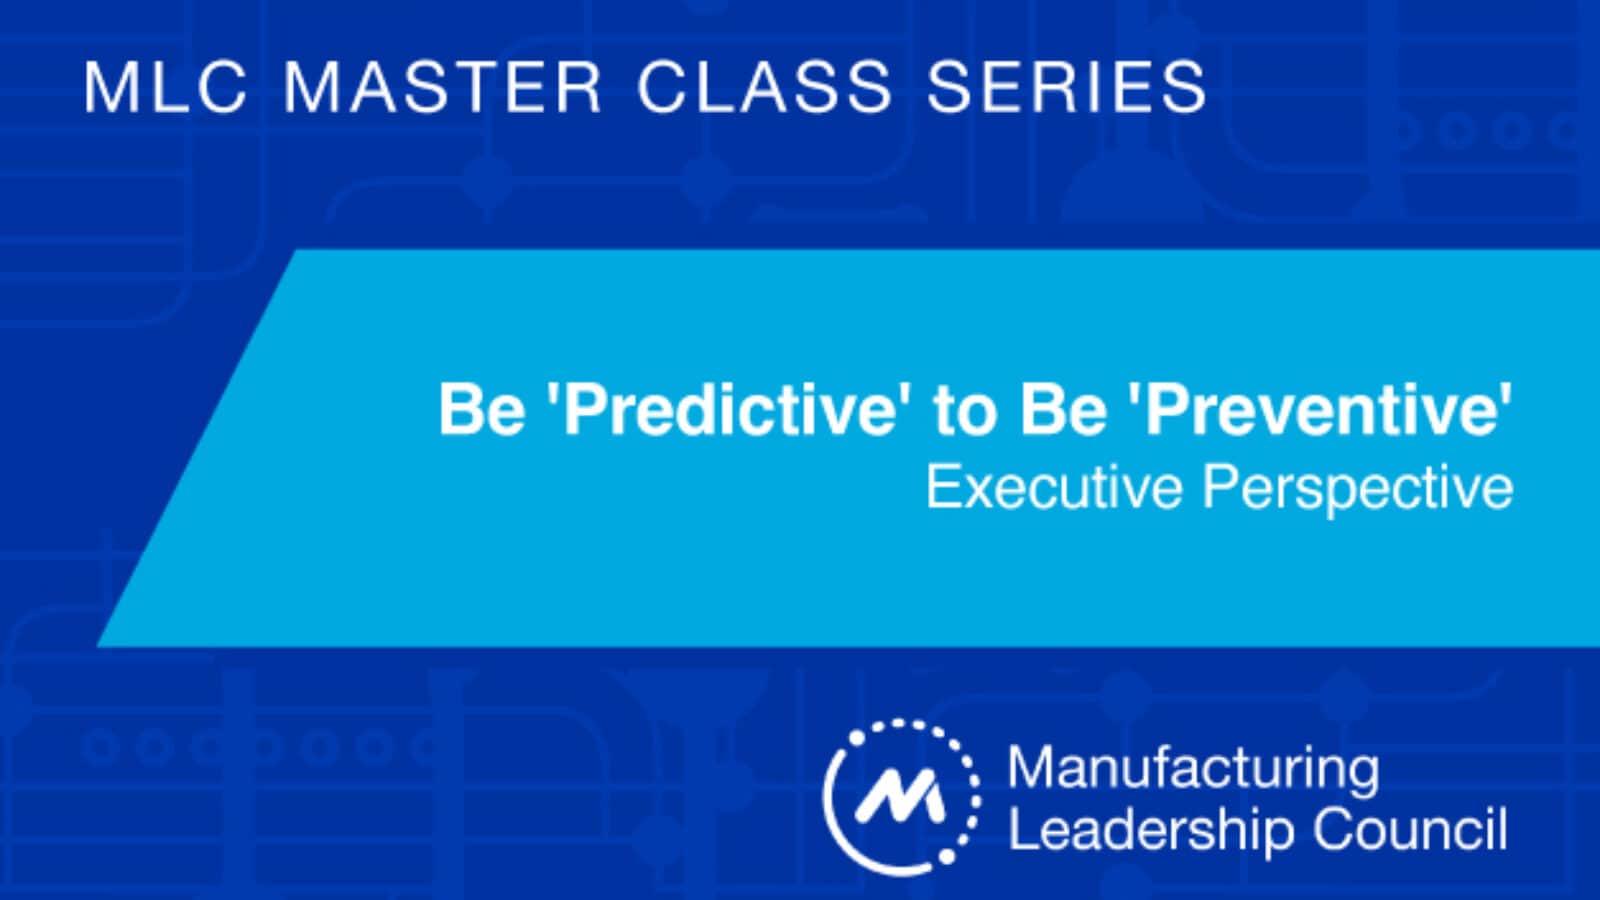 Master Class Executive Perspective: Be 'Predictive' to Be 'Preventive'